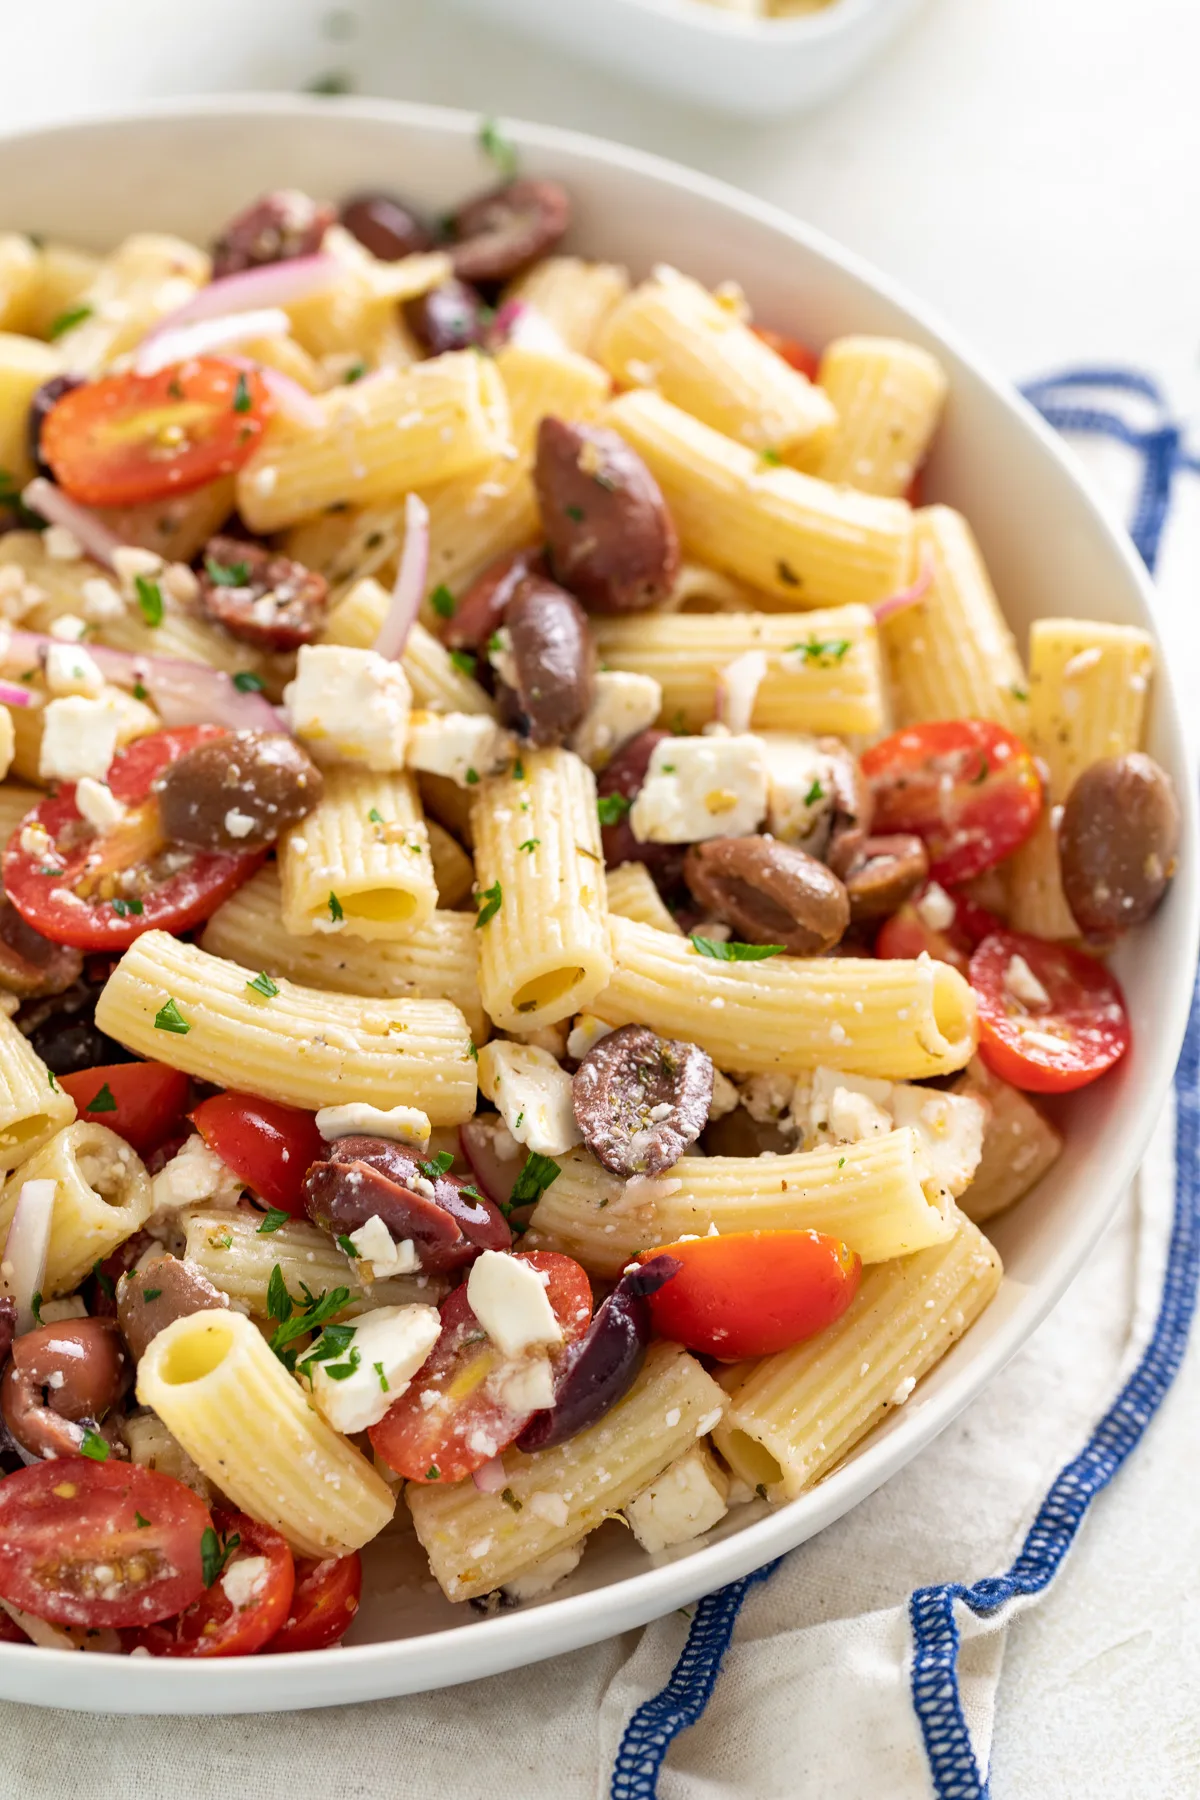 Side view of pasta salad with tomatoes and olives in a bowl.